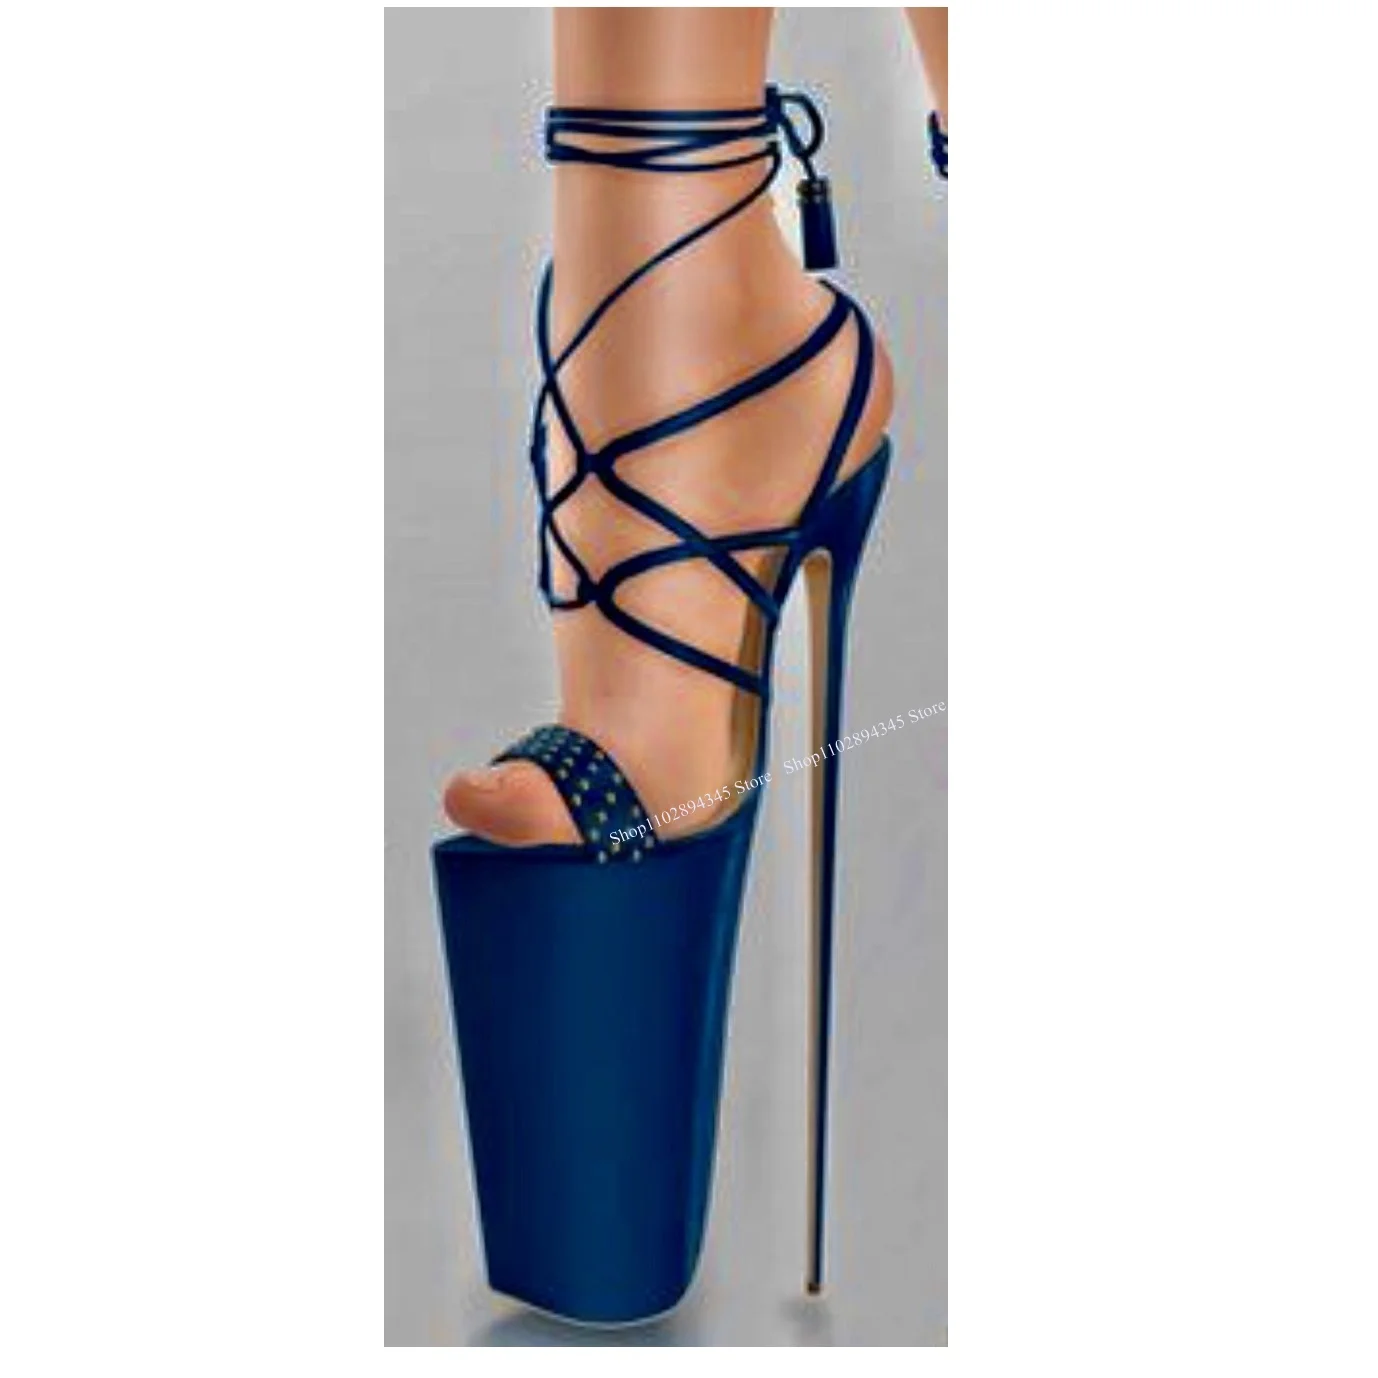 

Blue Lace Up Tassels Platform Sandals Thin High Heel Peep Toe Fashionable Sexy Cool Summer Big Size Woman Shoes Zapatillas Mujer